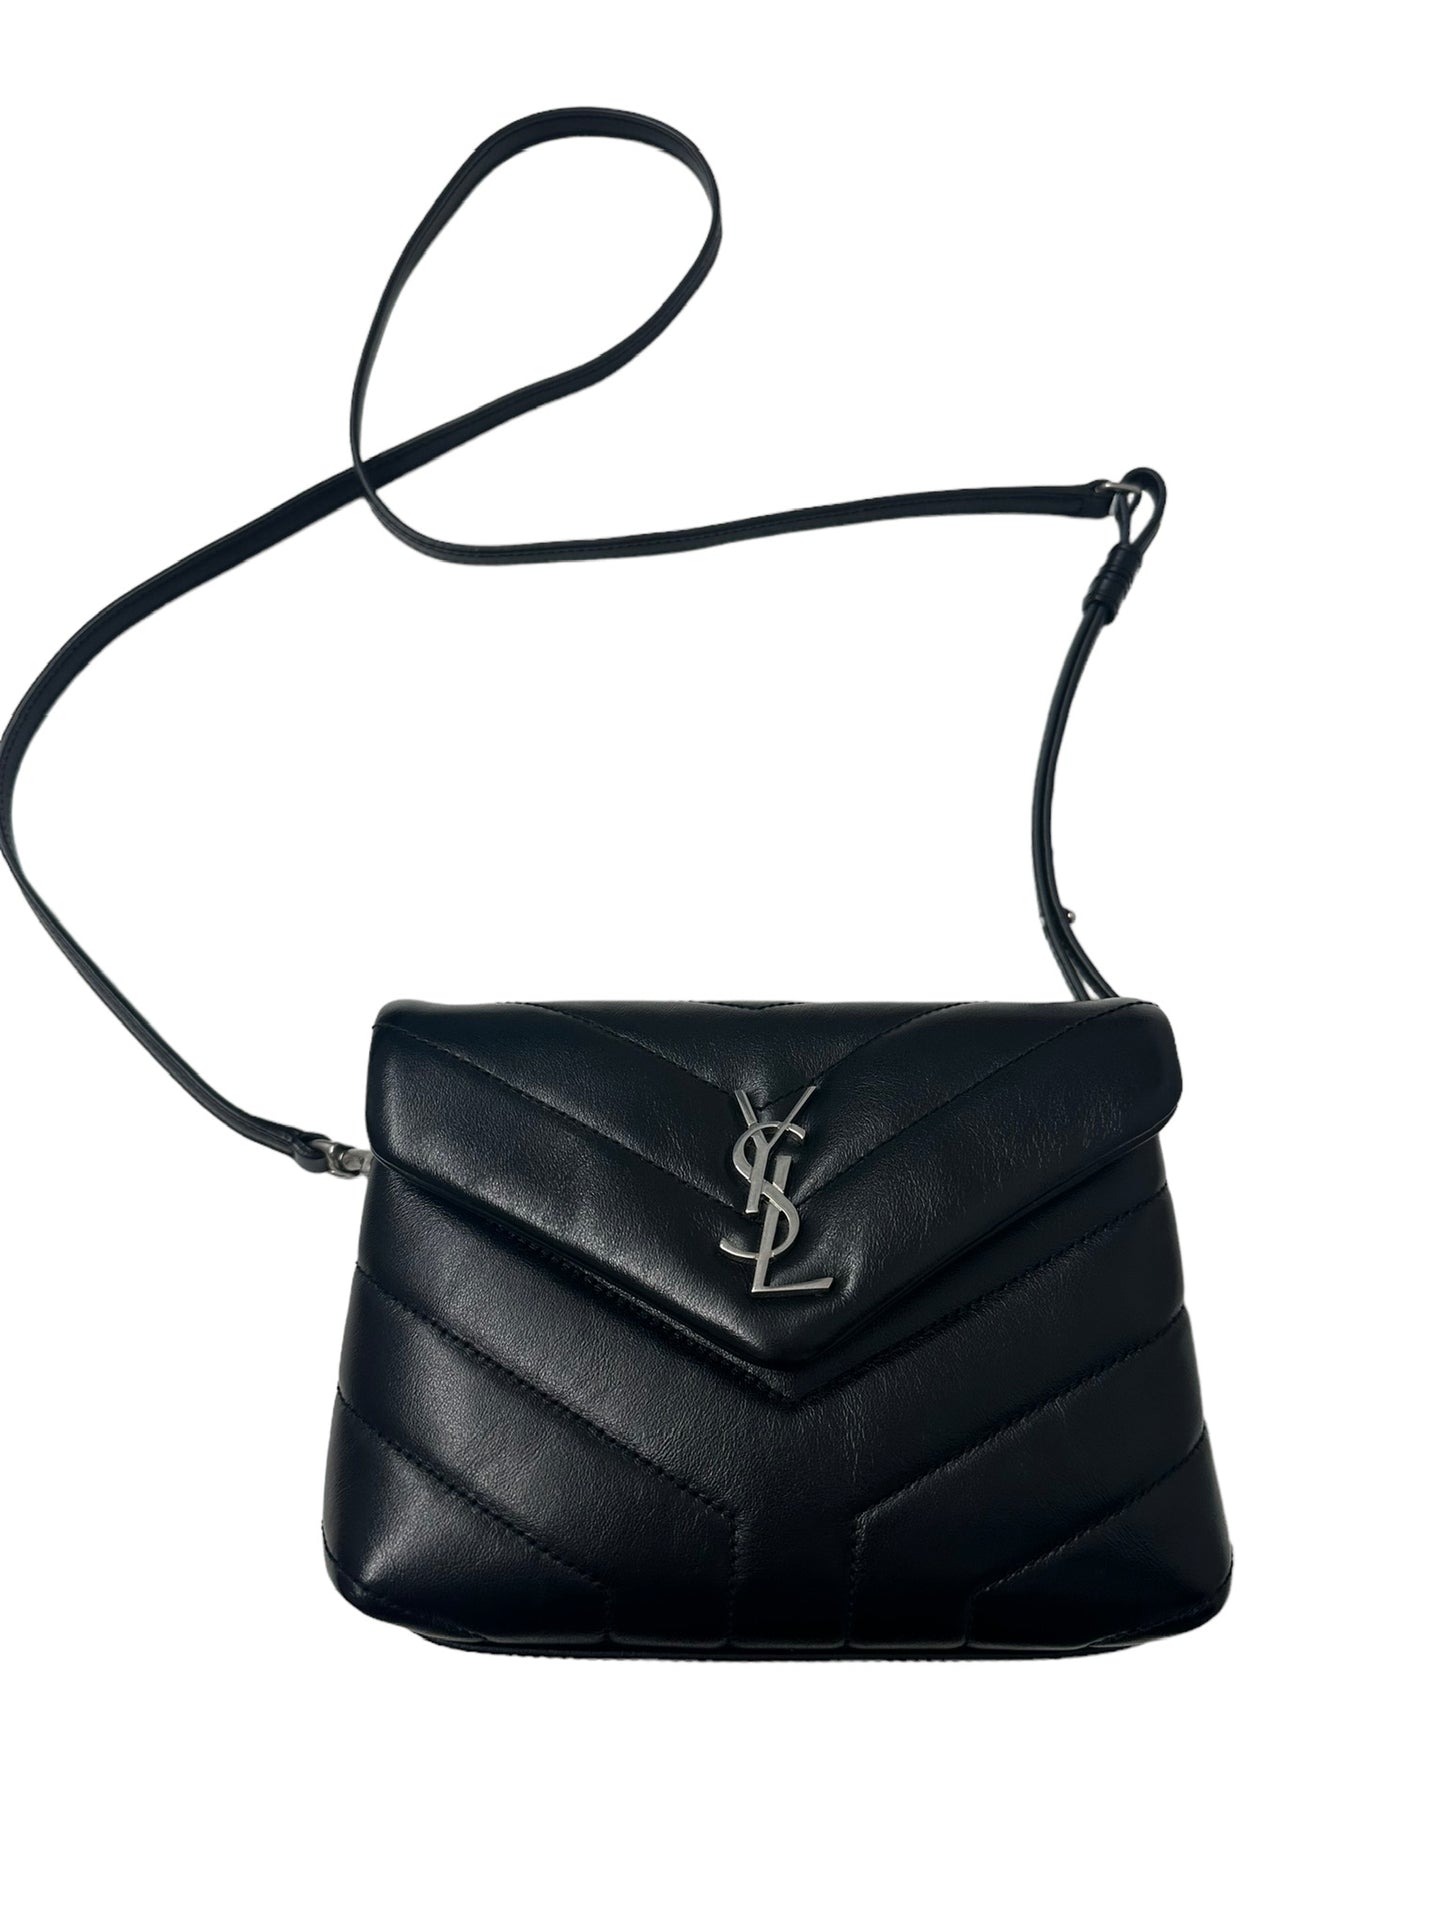 SAINT LAURENT - Black Quilted Leather Loulou Toy Size